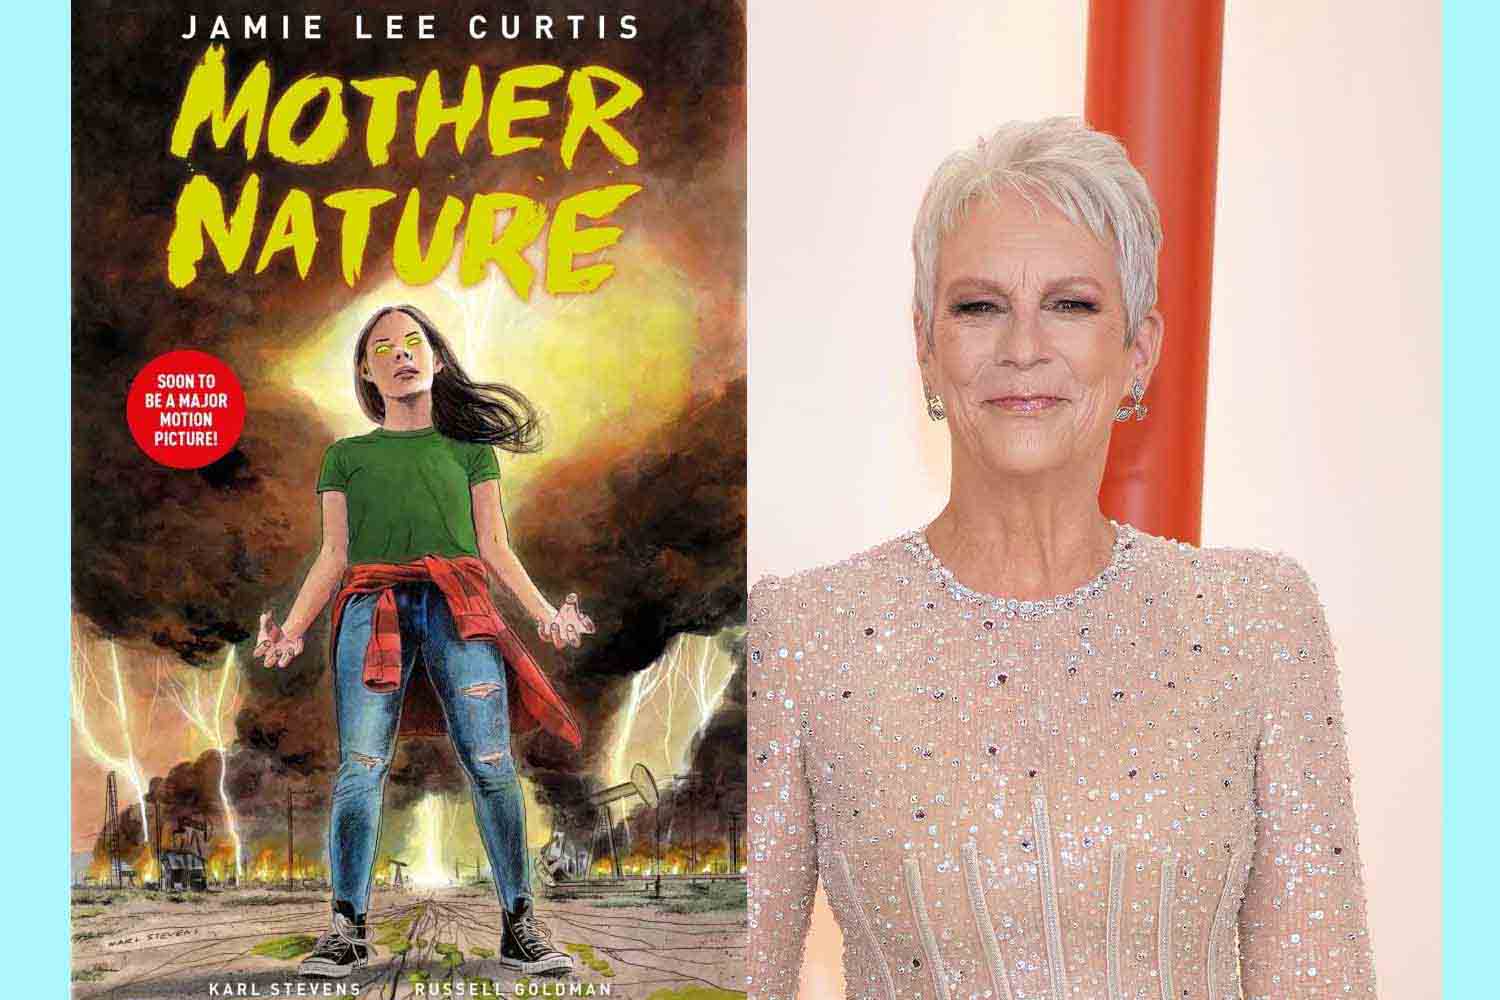 mother nature graphic novel jamie lee curtis